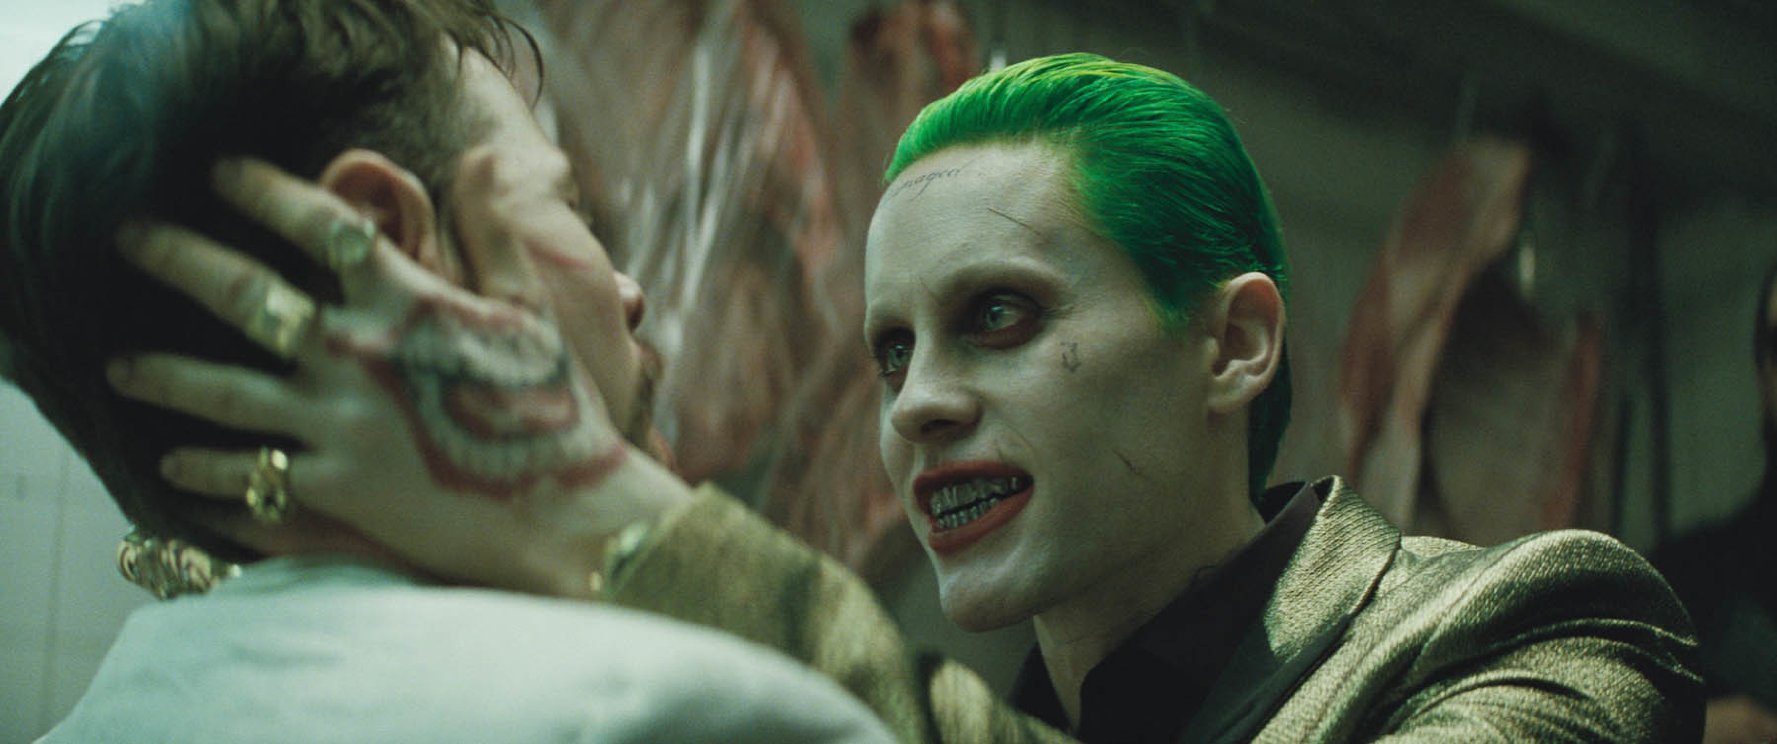 Best Hairstylish and make up Suicide Squad